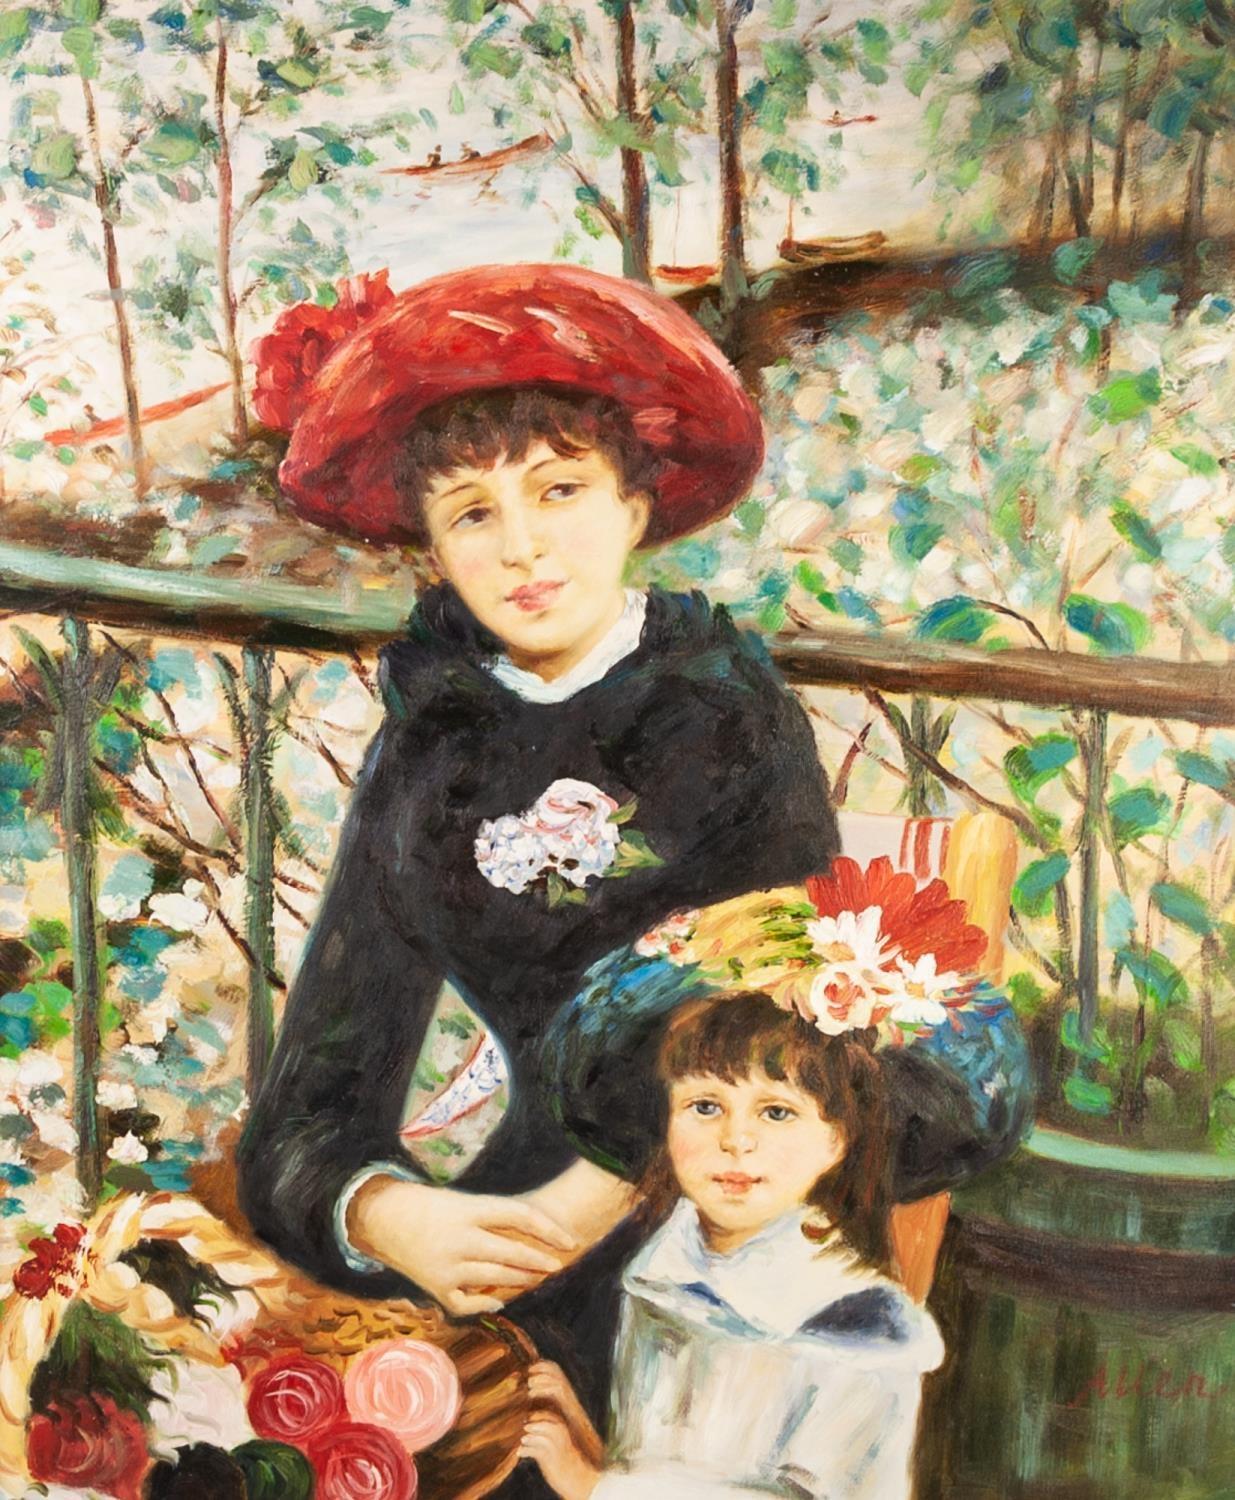 AFTER PIERRE-AUGUSTE RENOIR OIL PAINTING ON CANVAS 'Two Sisters' 24" x 20" (61 x 51cm)